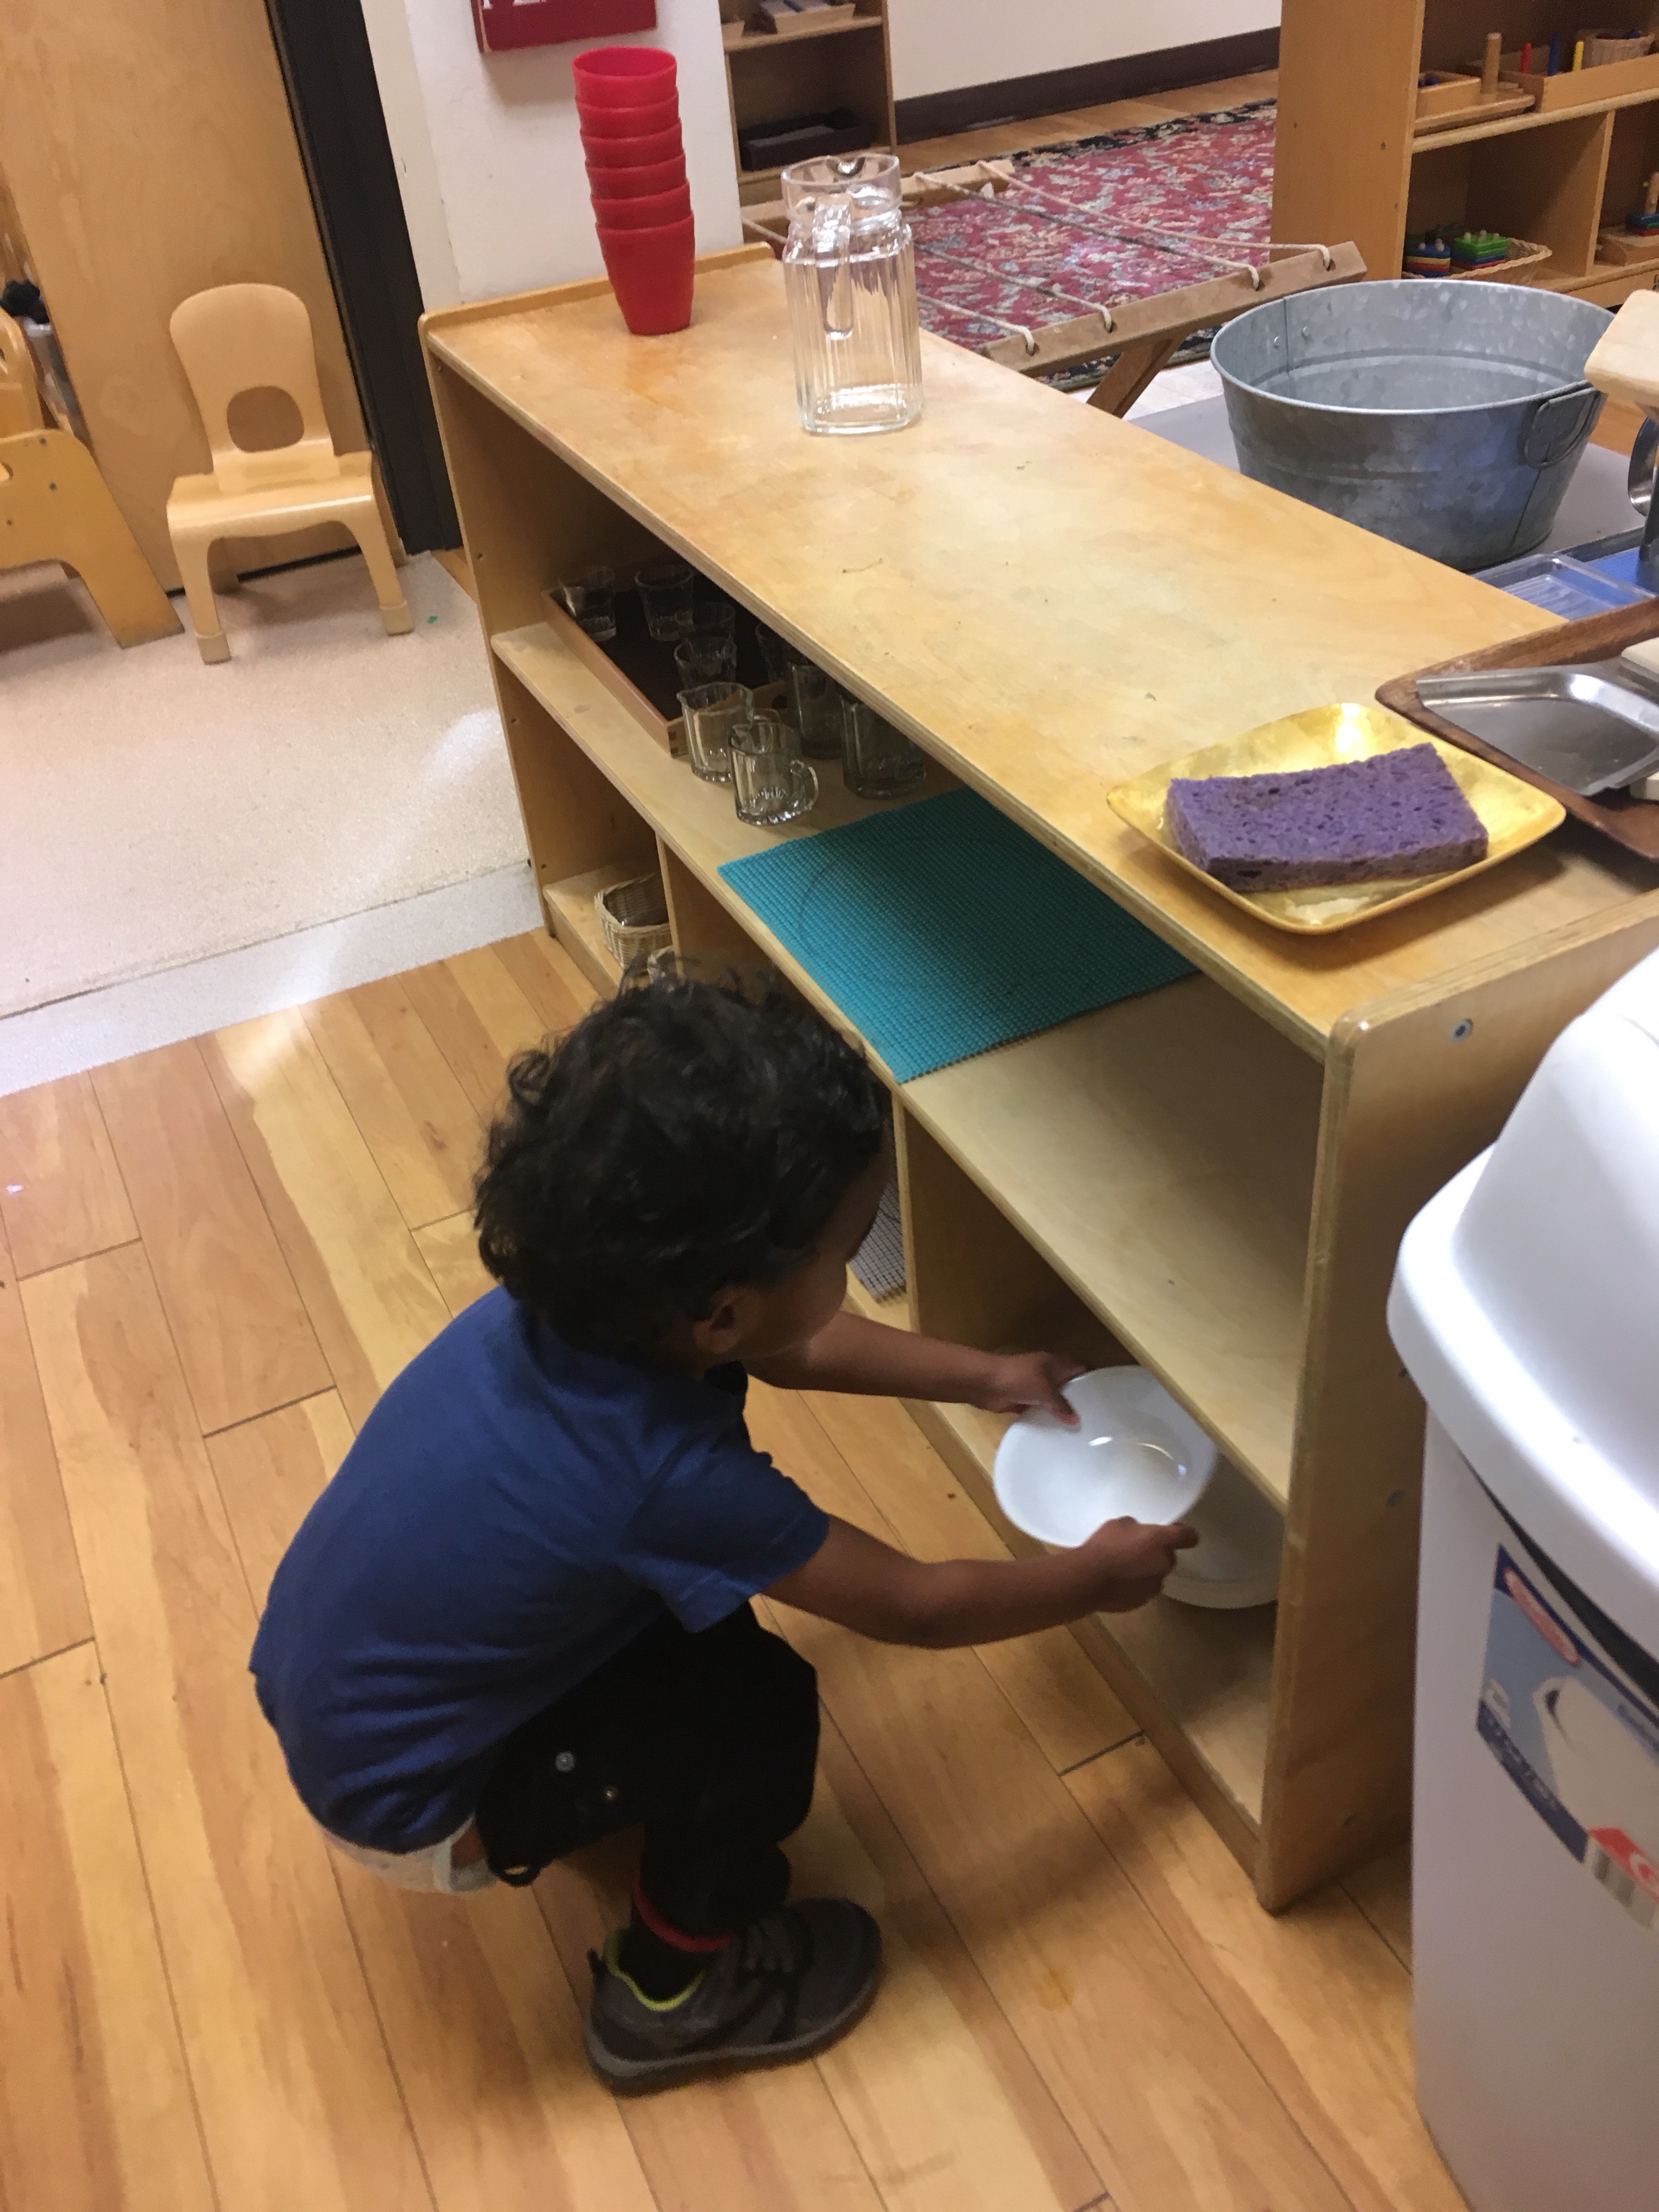 Easy to reach plates for your toddler to help with dinner